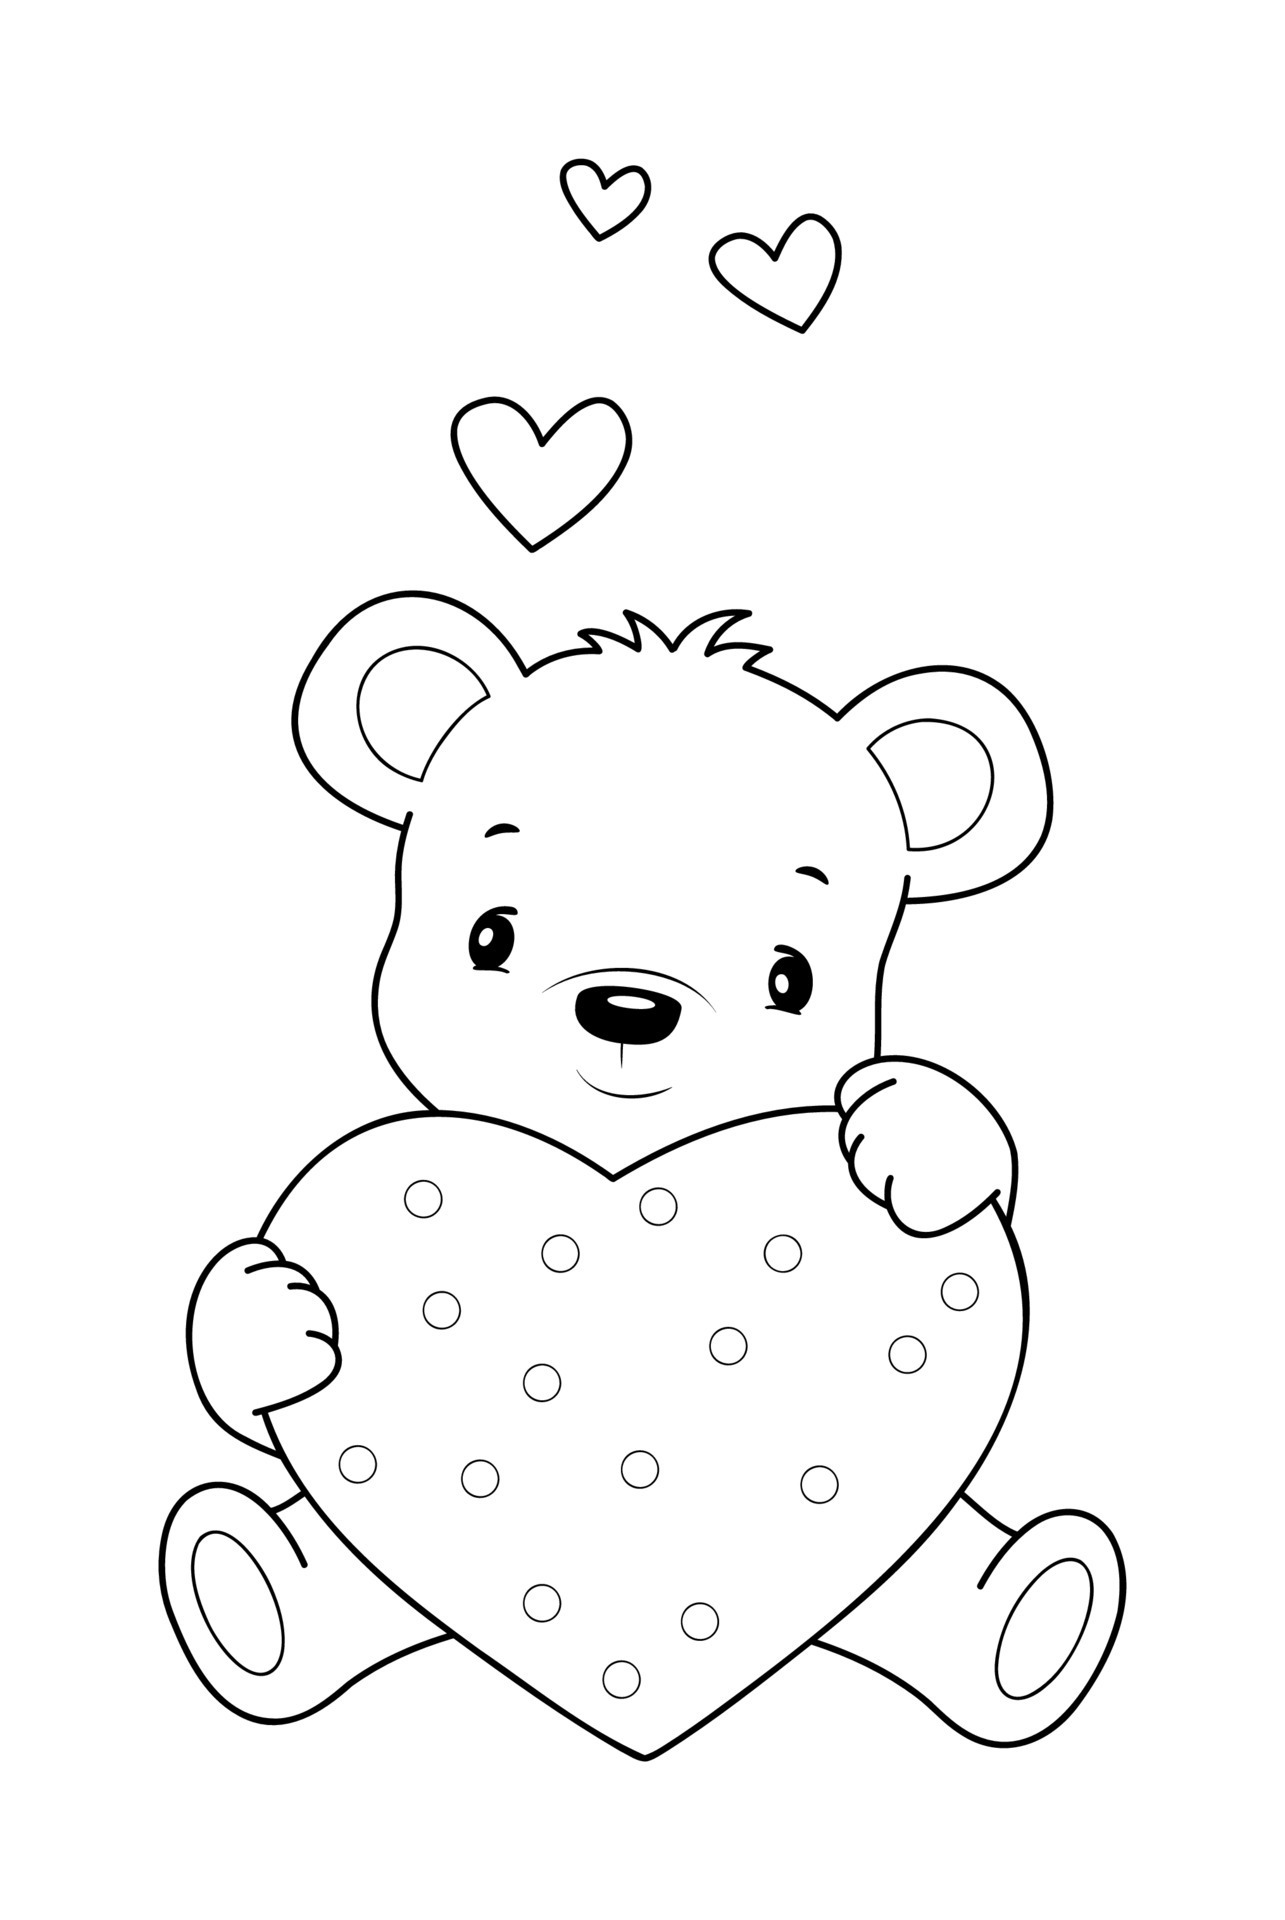 Teddy bear black and white outline illustration. Coloring book or page ...